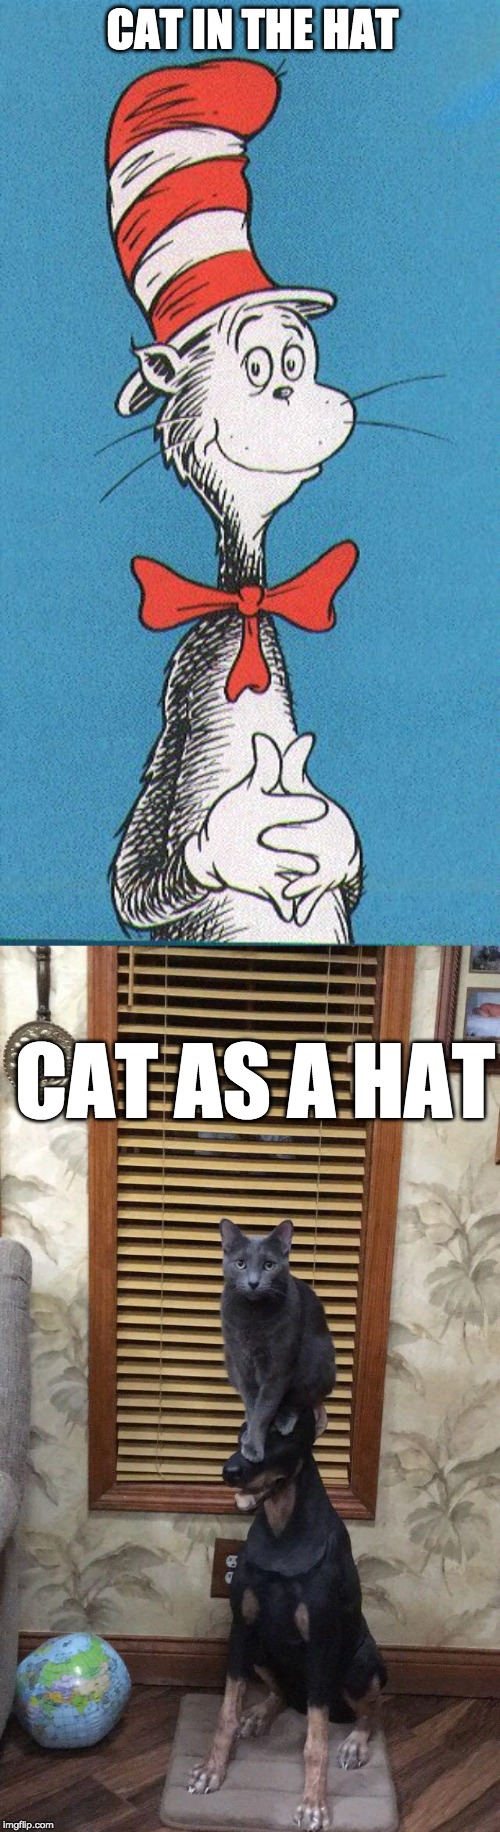 Image tagged in cat in the hat Imgflip